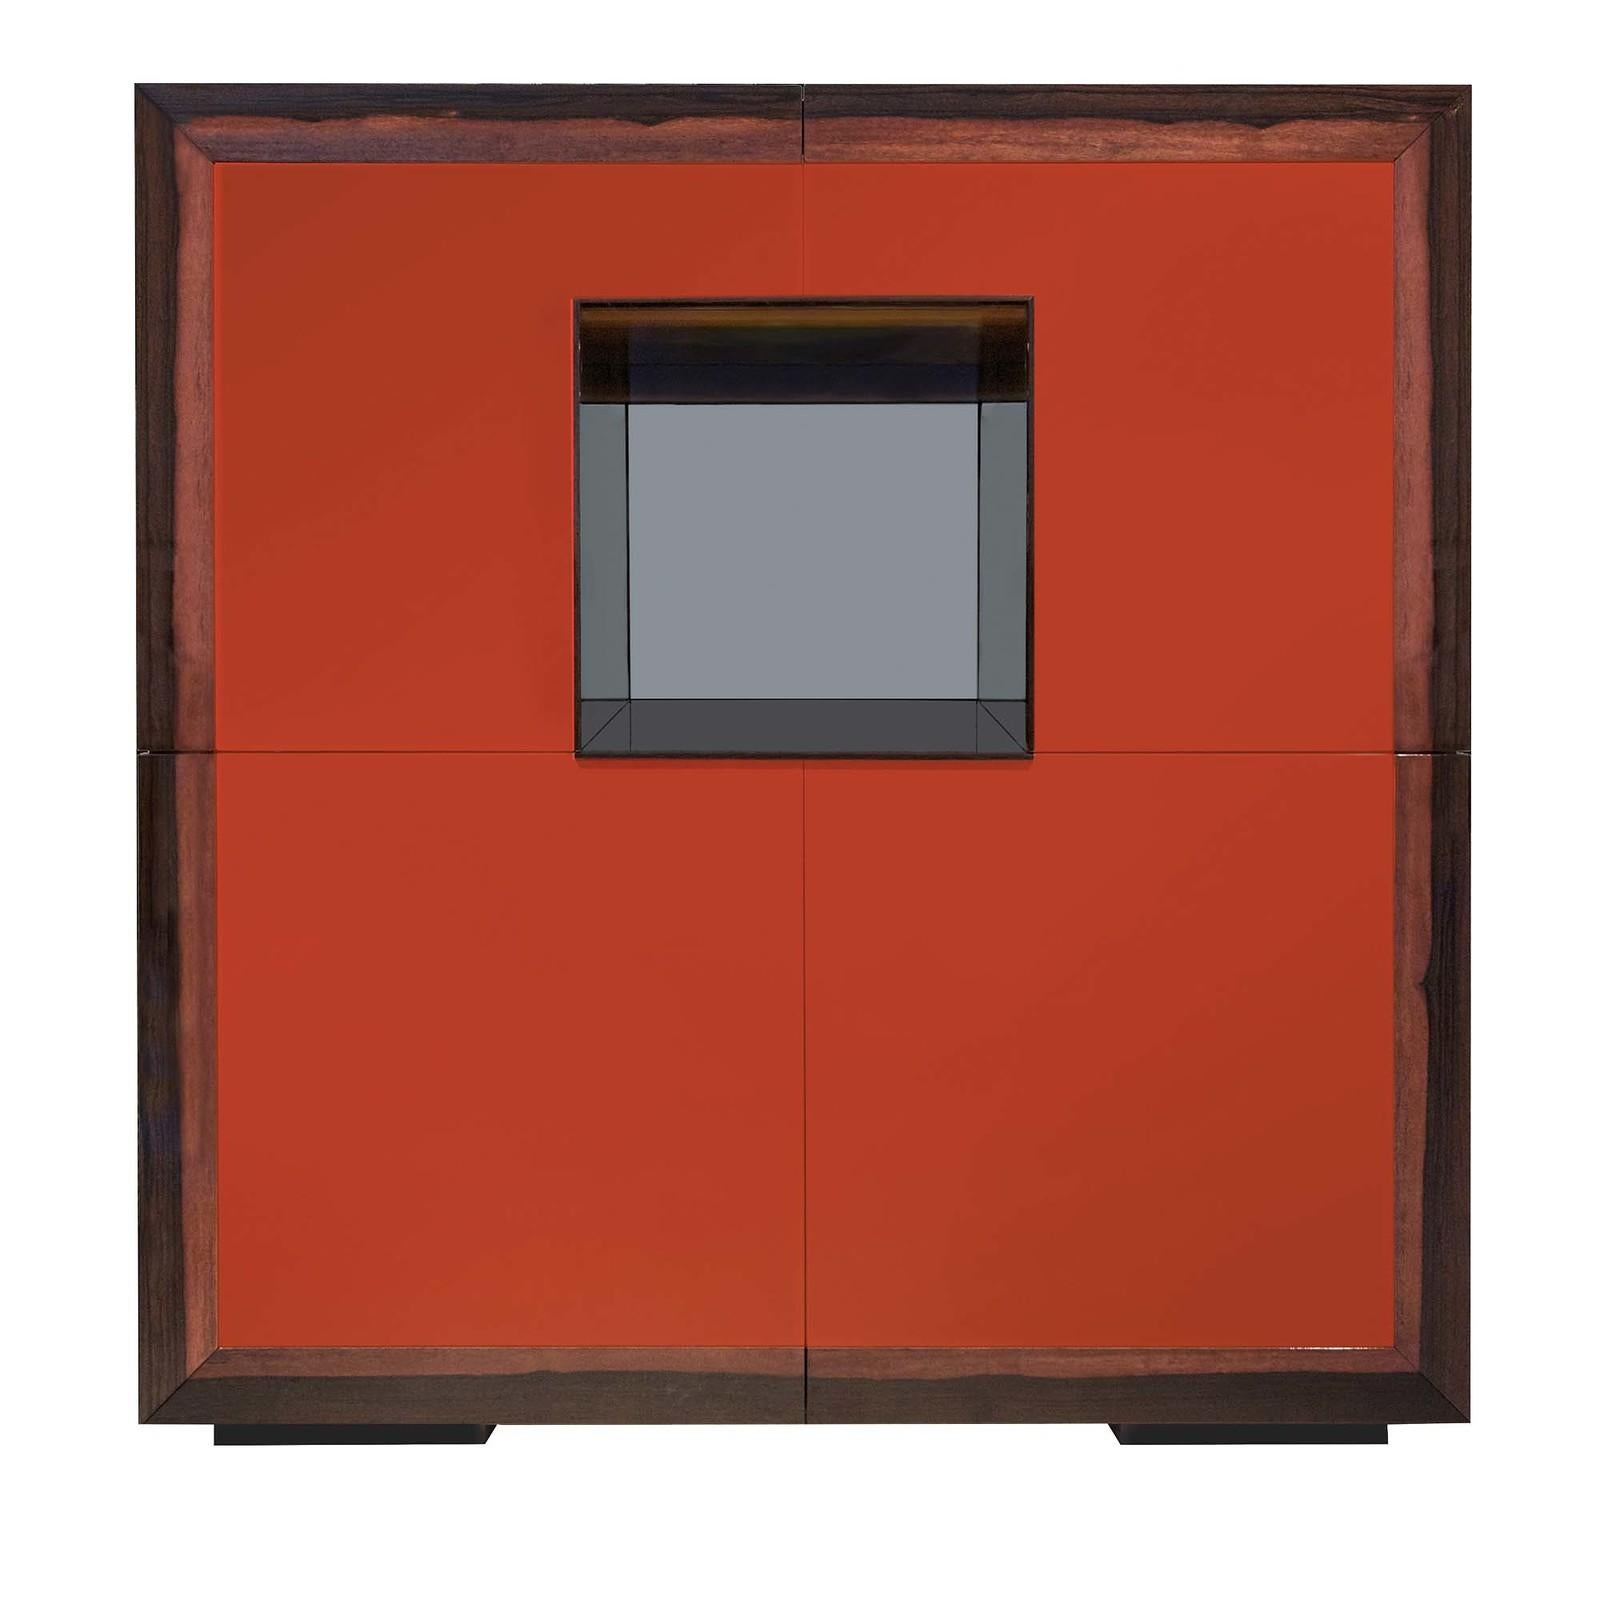 Defined by pure geometry, this bar cabinet is as functional as it is sophisticated and will elevate any dining room with its bold colors and modern lines. The red china polyurethane lacquer of the square structure is complemented by the Macassar